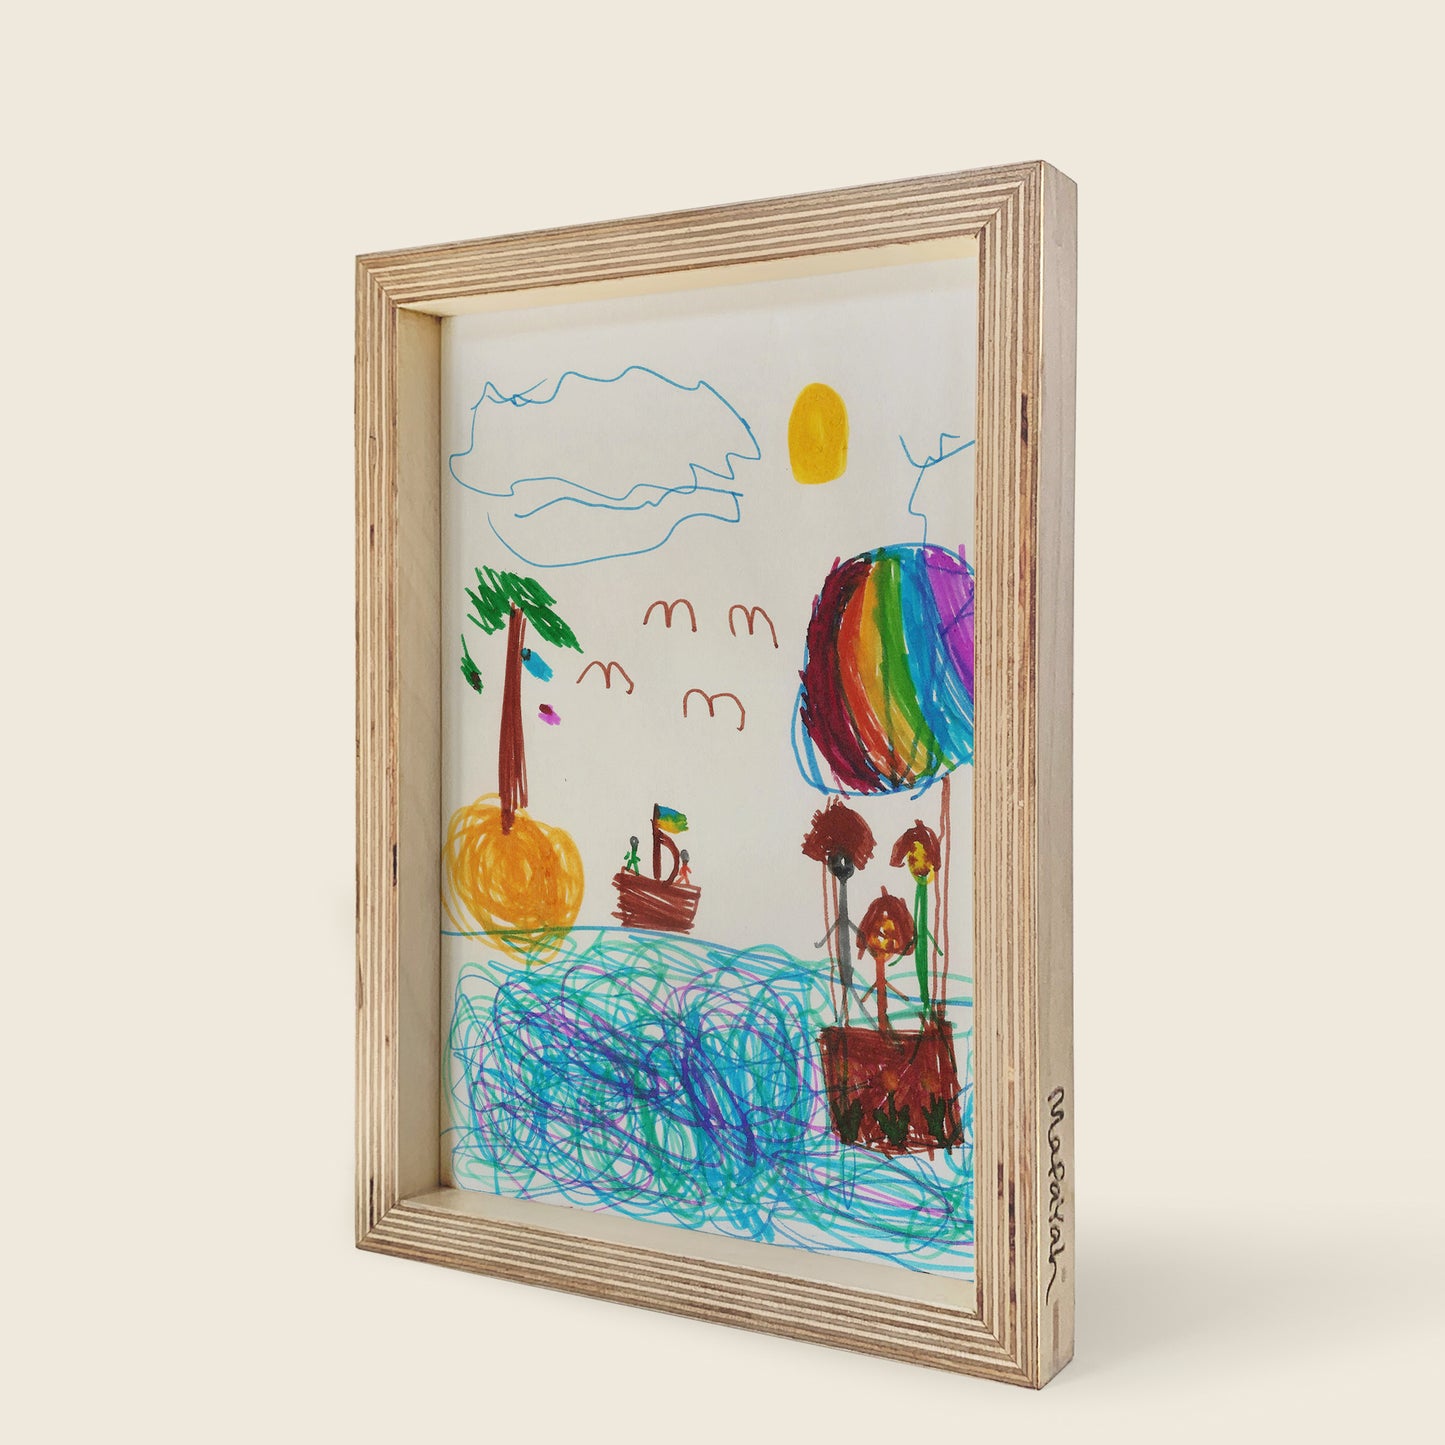 FLAUNT - Magnetic Birchwood Picture Frame for Room Decor by MAPAYAH